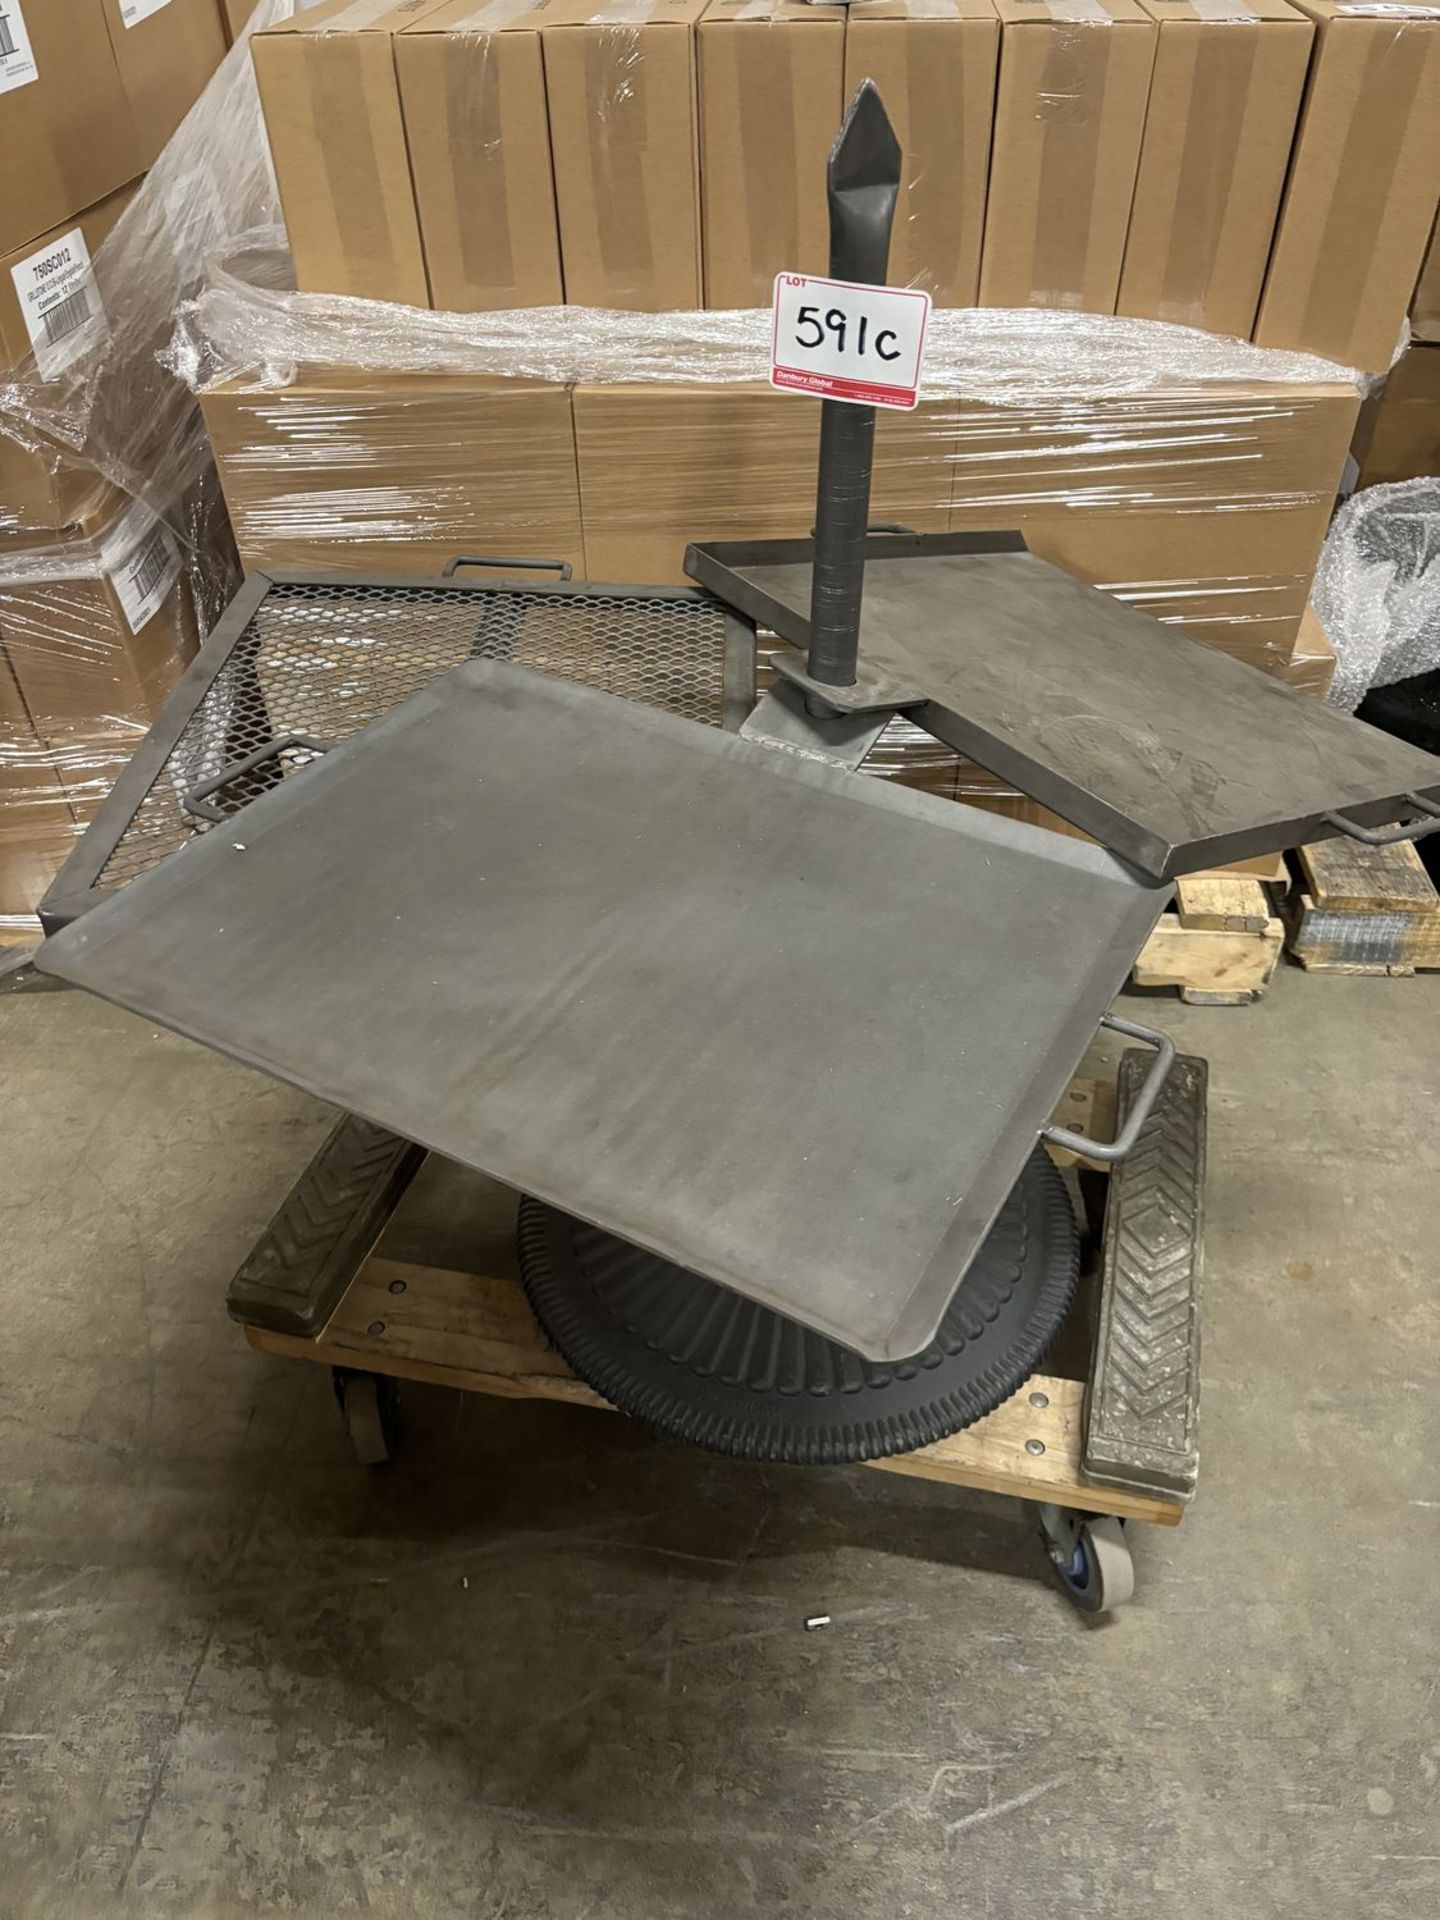 THE MOUNTAIN MAN SWIVEL GRILL & GRIDDLE (FLOOR MODEL) (MSRP $229.99)